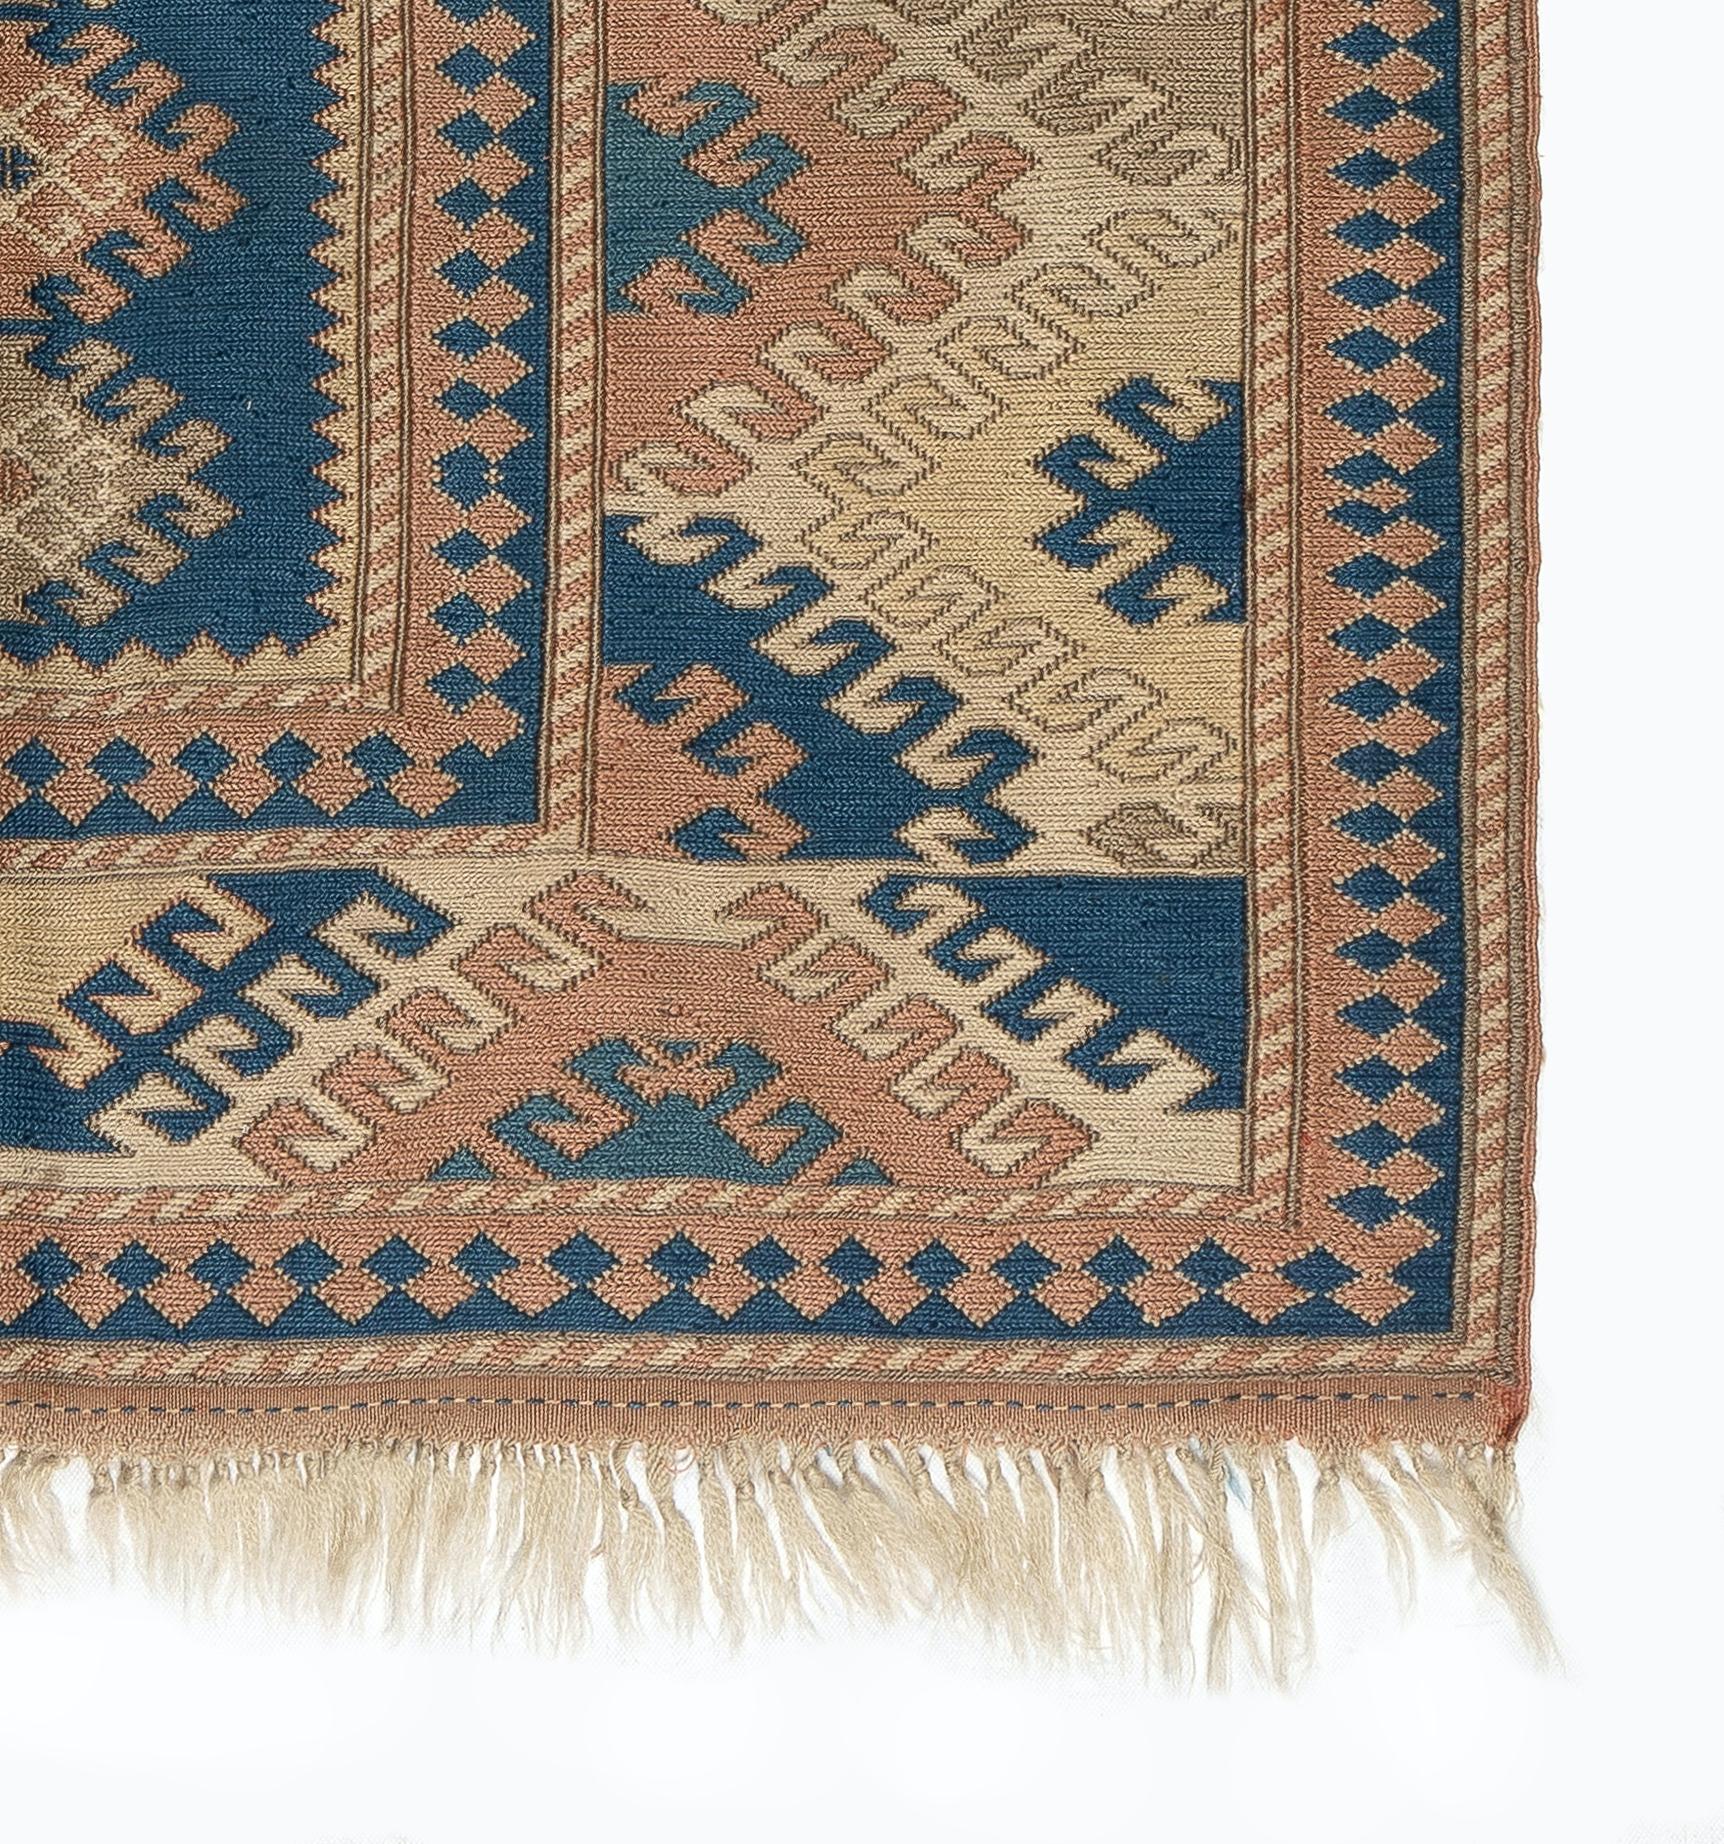 20th Century 4x5.8 Ft Vintage Soumak Turkish Accent Rug with Wool Pile For Sale